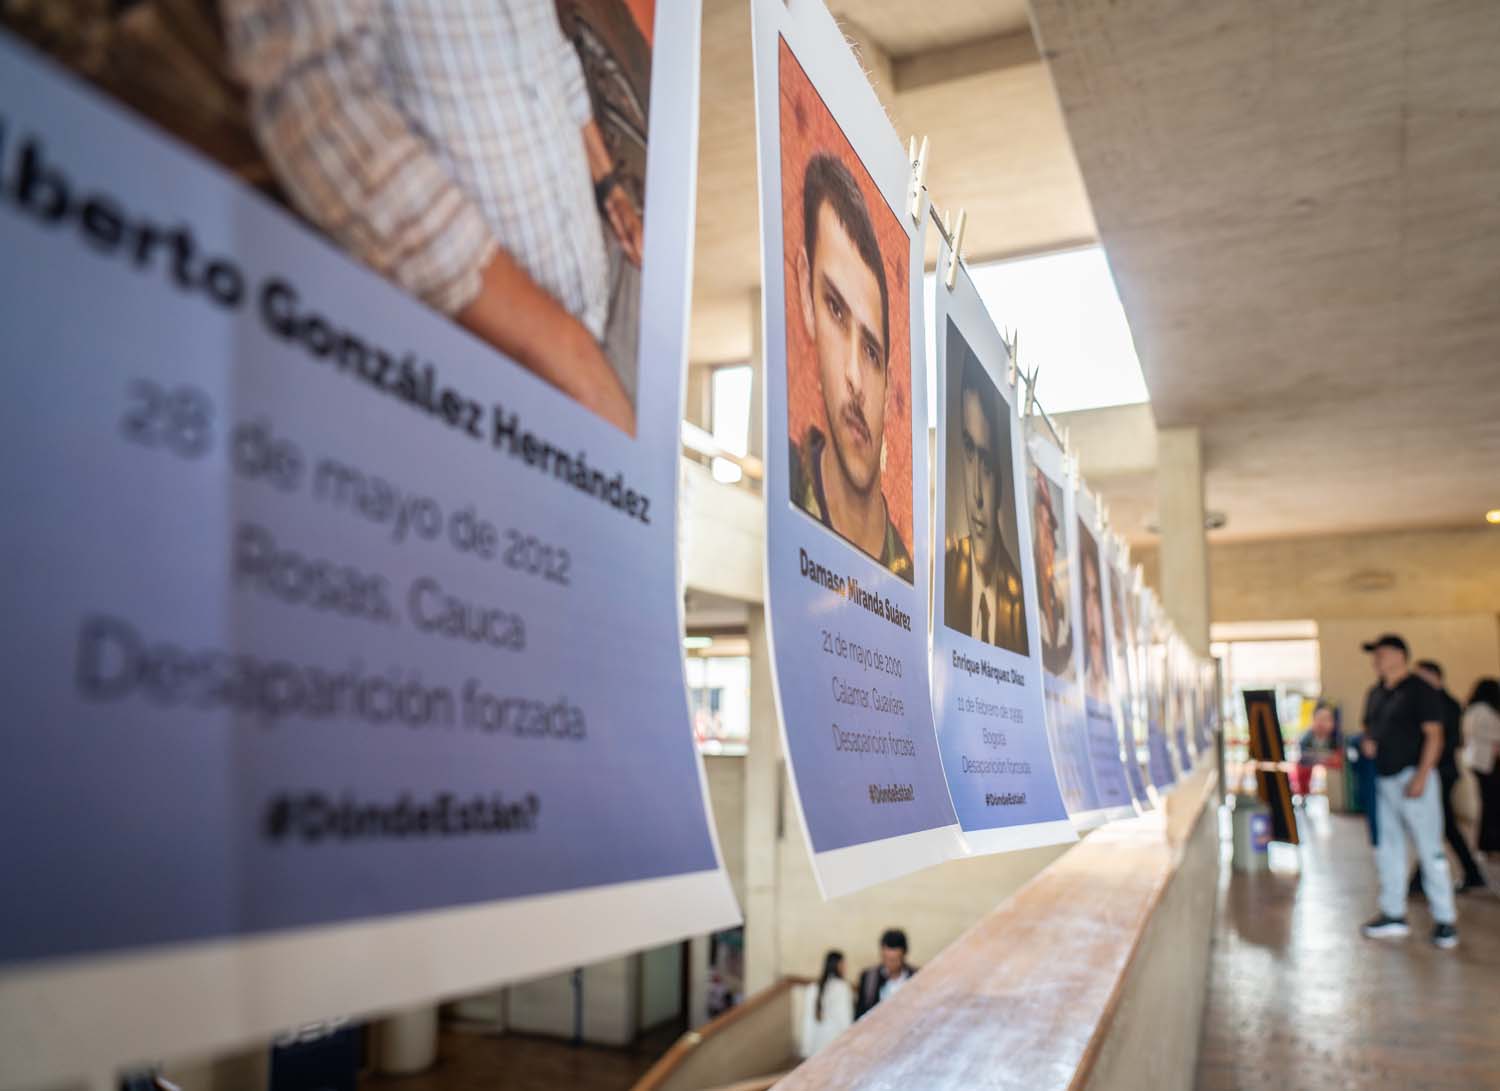 Photo tributes to the disappeared victims are arranged outside of a library in Bogotá.